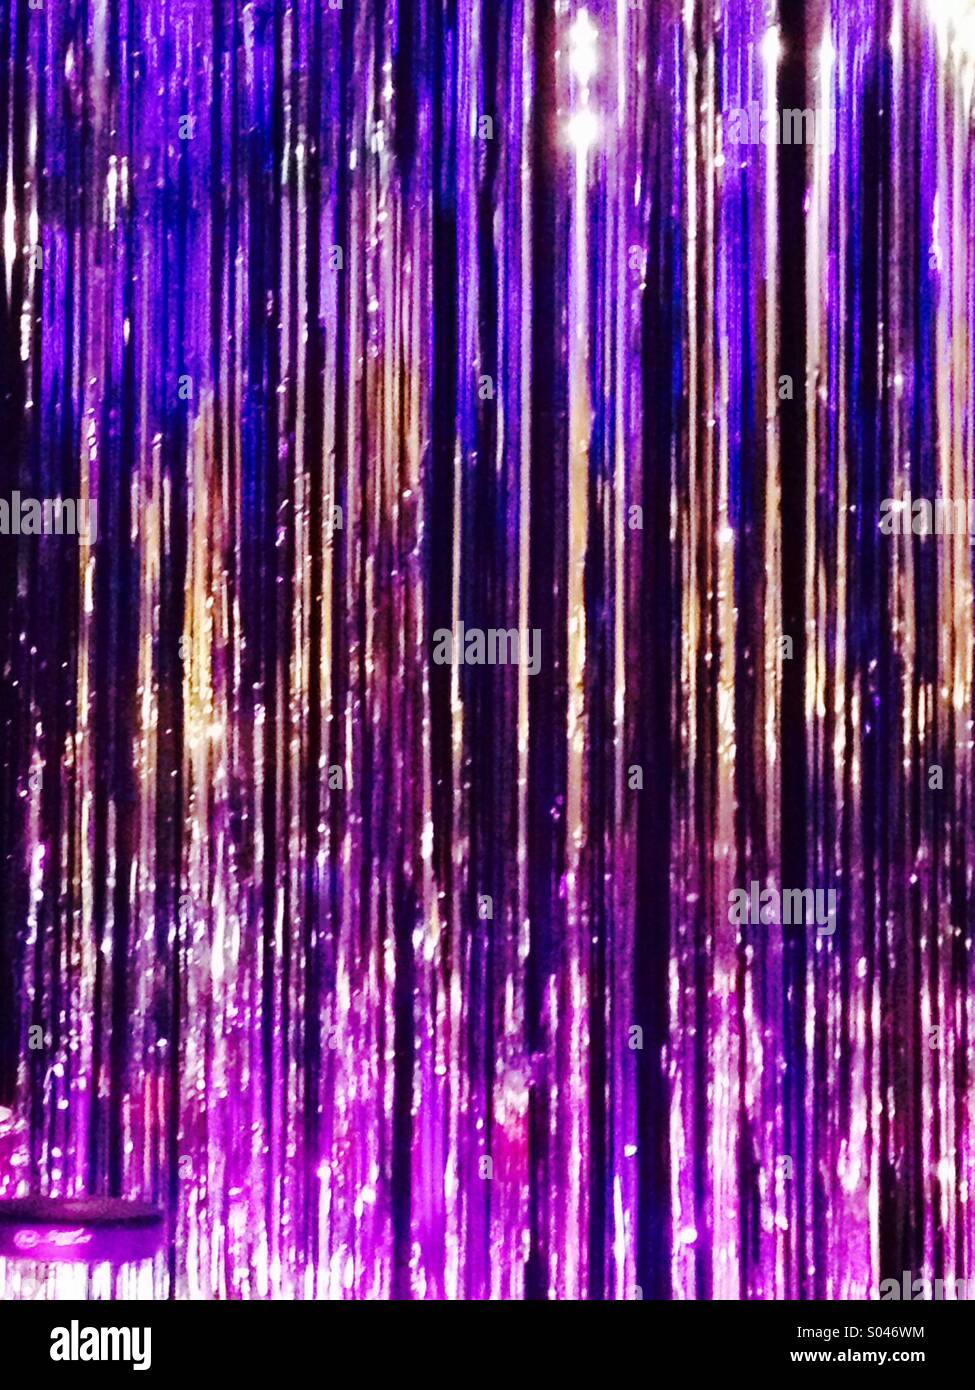 Brightly coloured violet purple silver sparkly stage backdrop Stock Photo